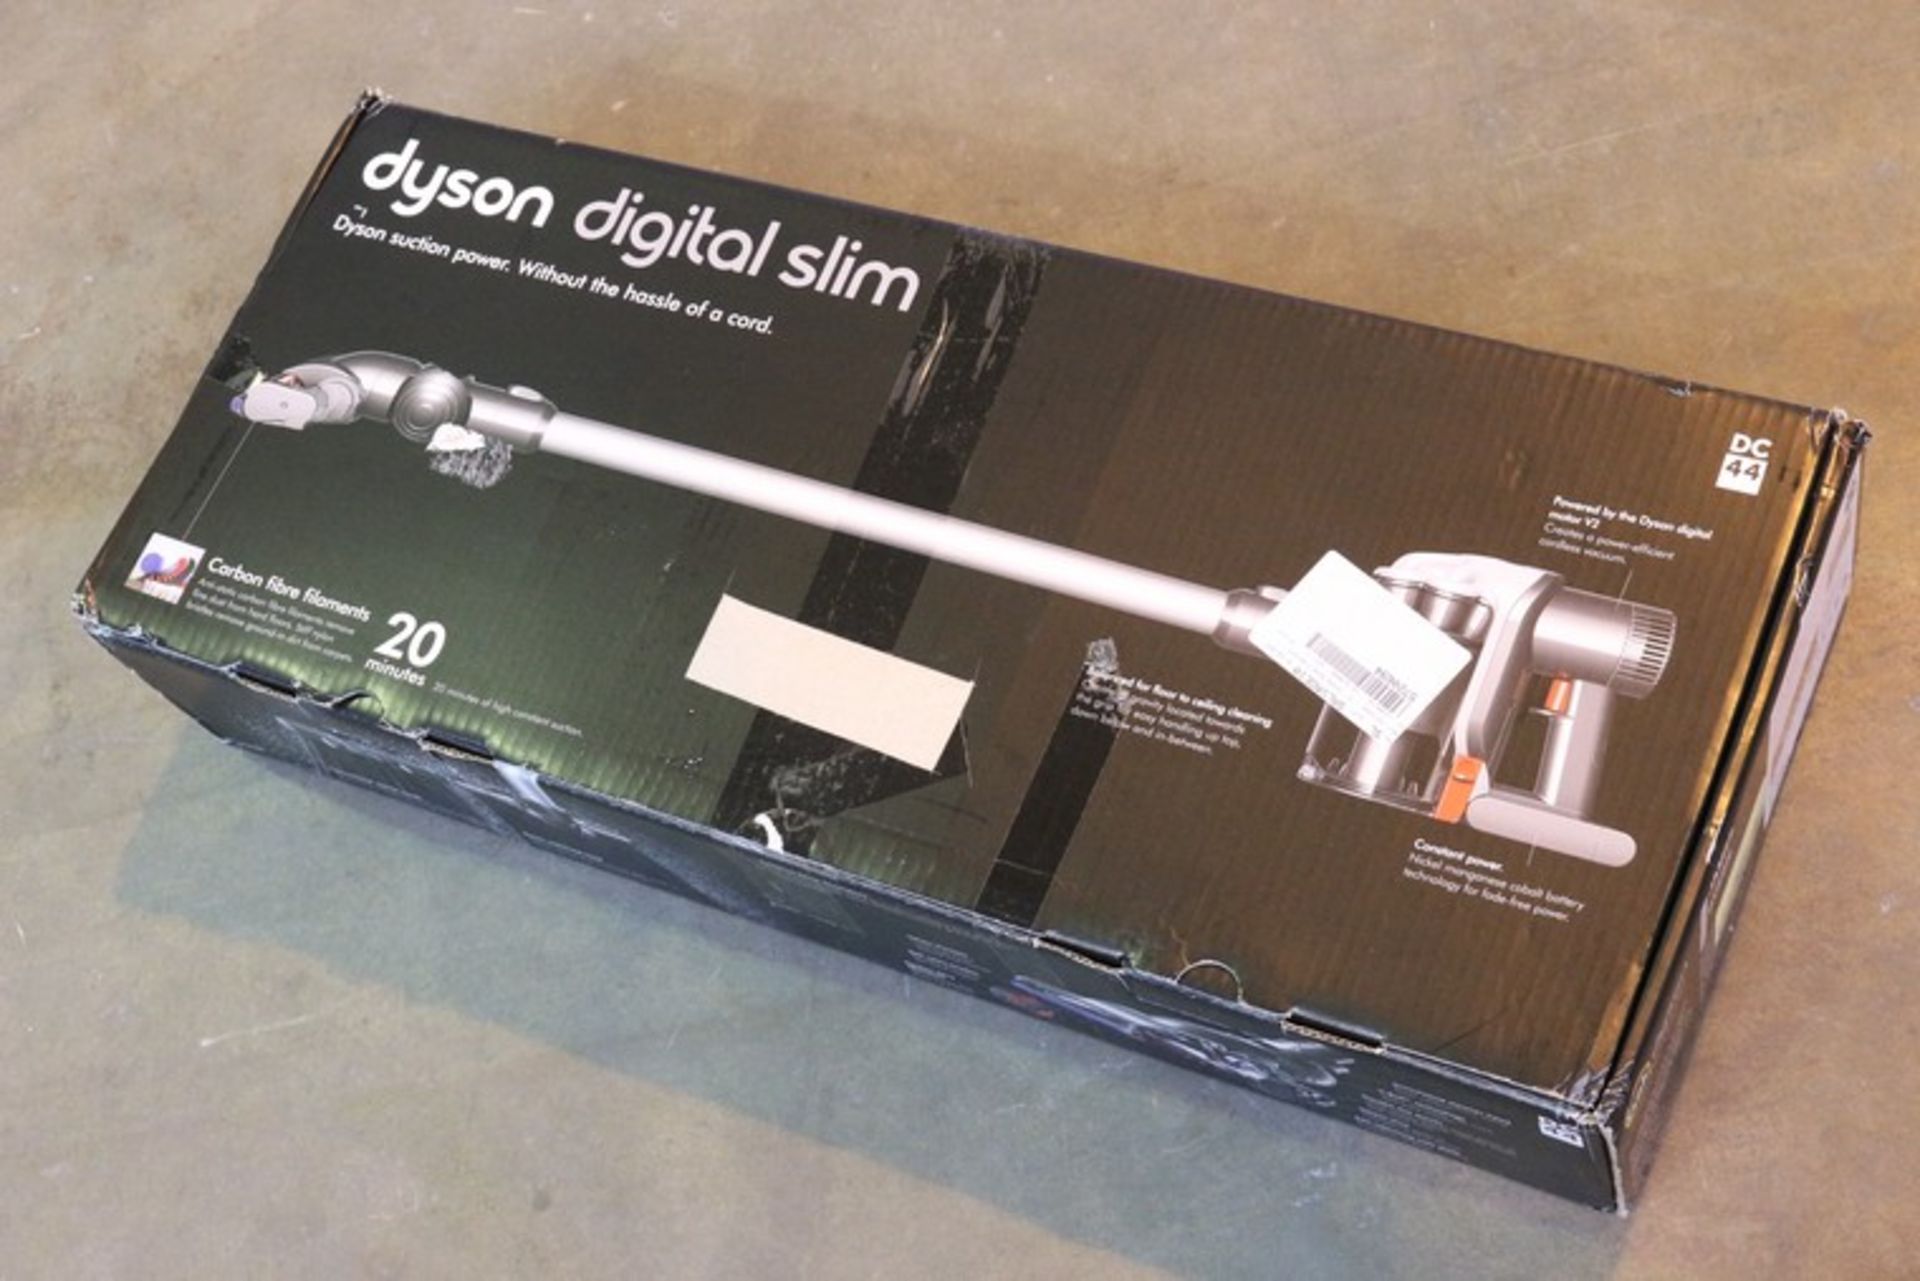 1 x BOXED DYSON DC44 DIGITAL SLIM HAND HELD CORDLESS VACUUM CLEANER *PLEASE NOTE THAT THE BID